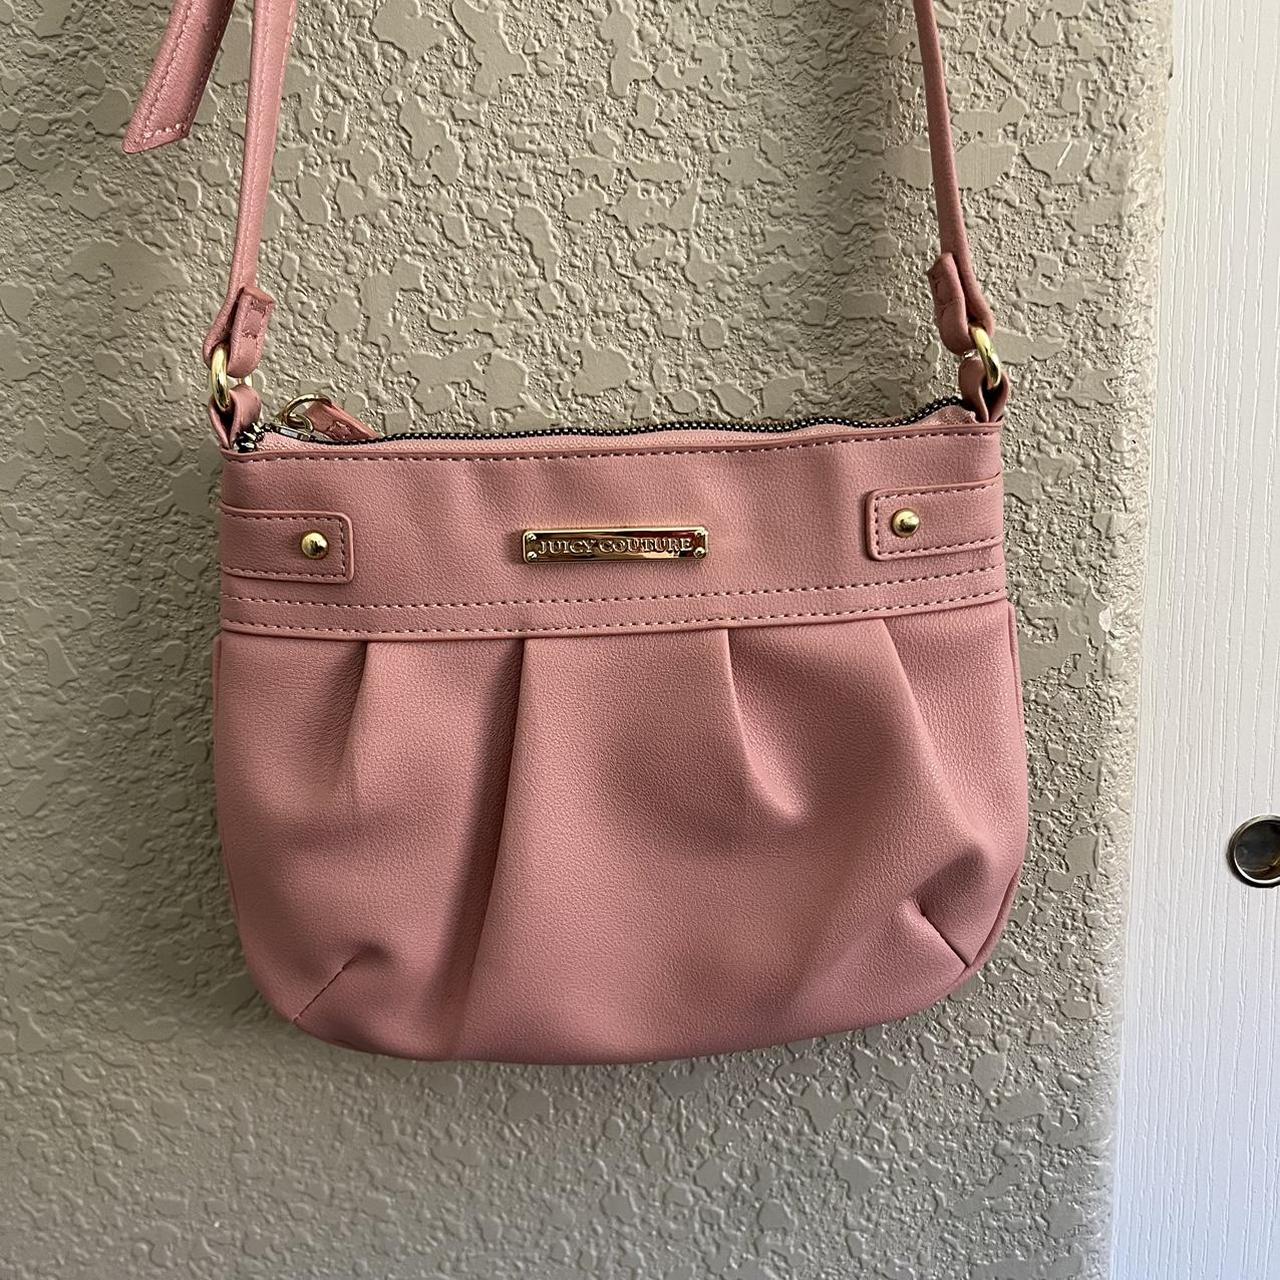 Juicy Couture Forever 21 Bag pink purse NEW ✨ | eBay